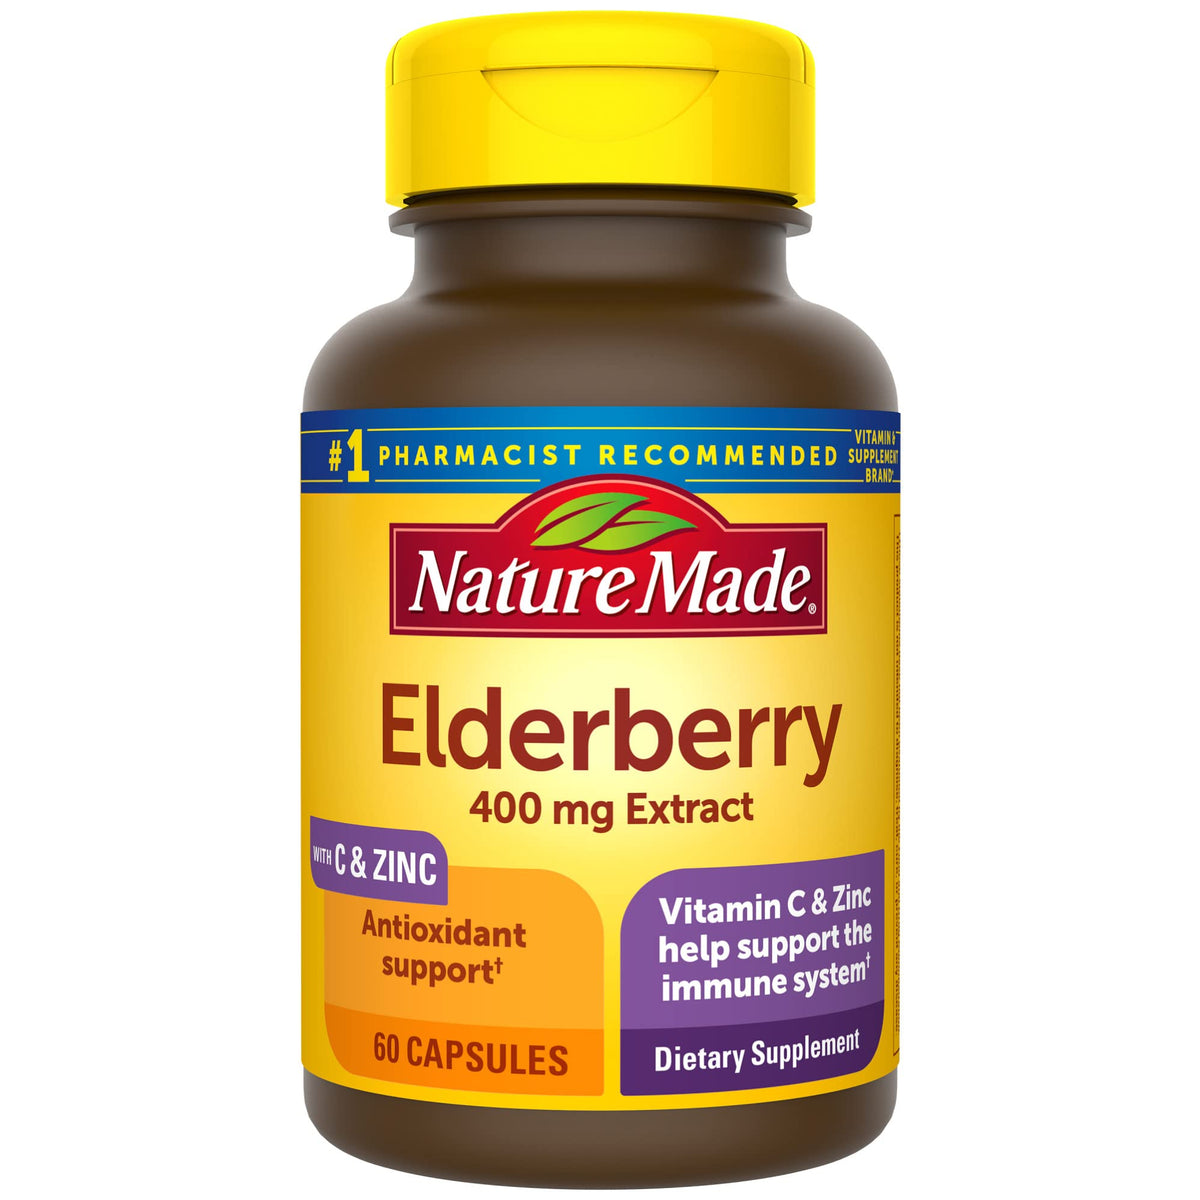 Nature Made Elderberry 400 mg Extract with Vitamin C and Zinc, Dietary Supplement for Immune Support, 60 Capsules, 60 Day Supply